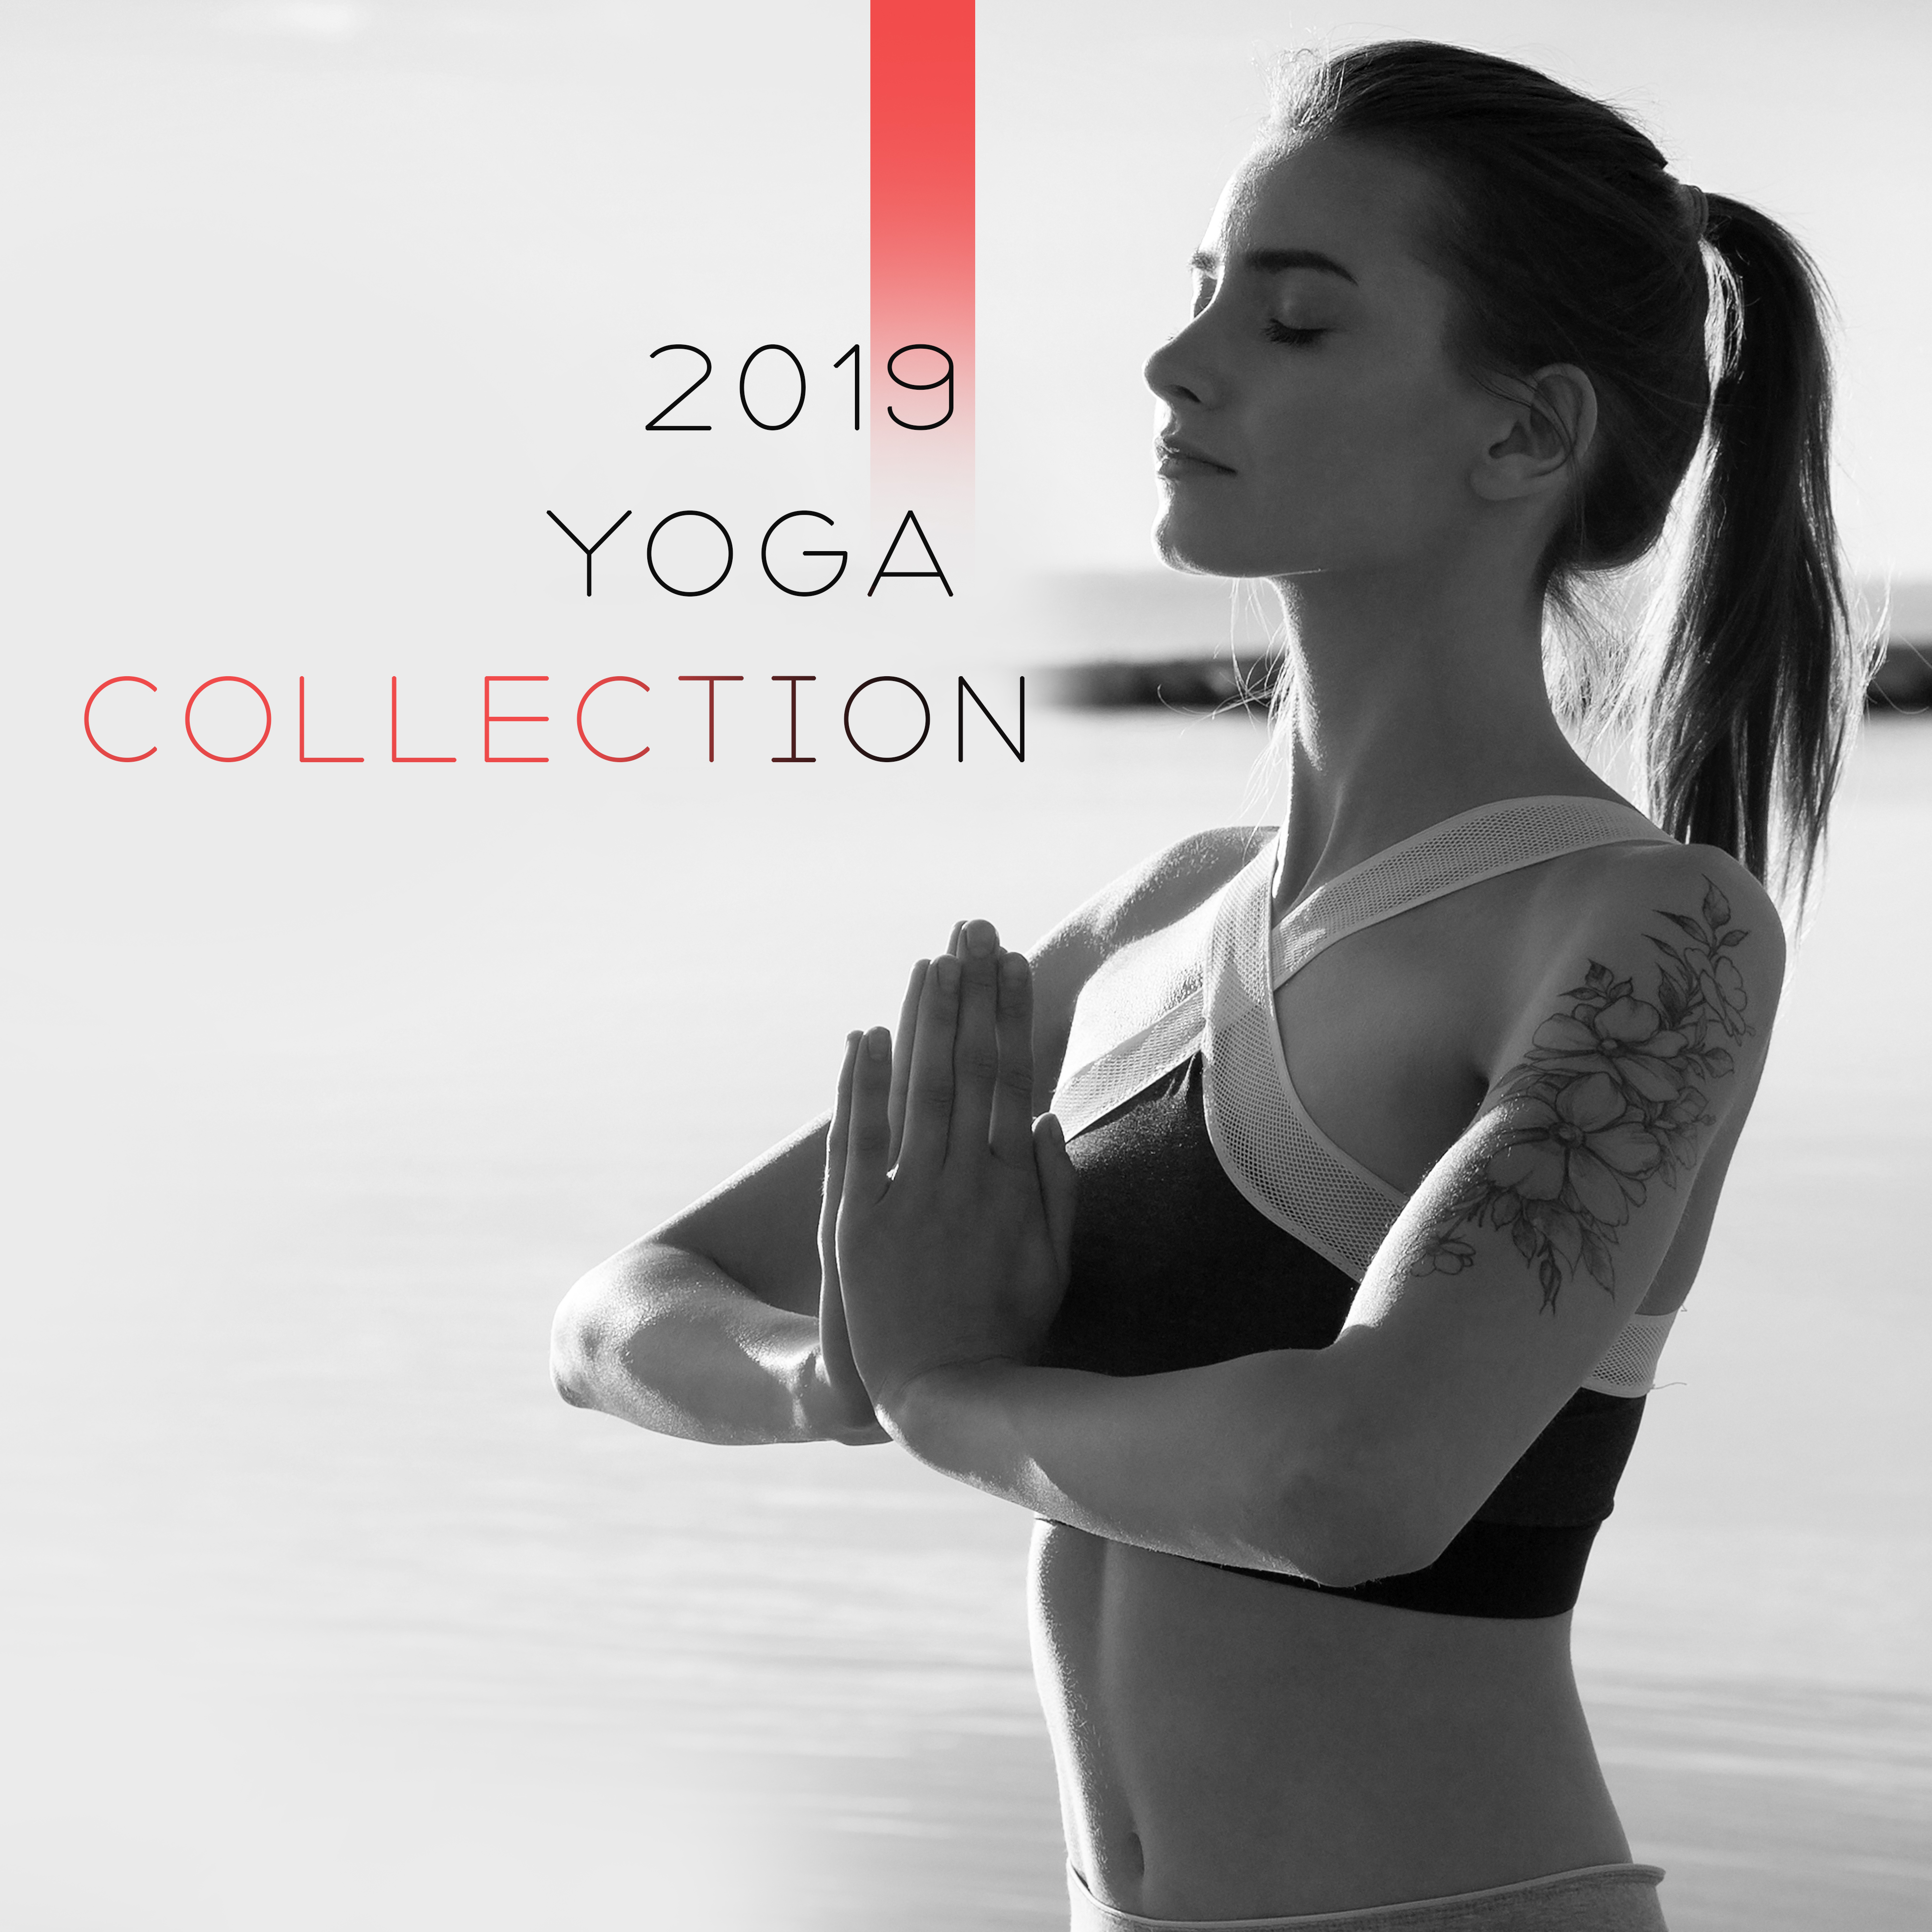 2019 Yoga Collection – Meditation Music Zone, Pure Zen, Inner Harmony, Soothing Meditation for Calm Mind, Yoga Relaxation, Deep Meditation